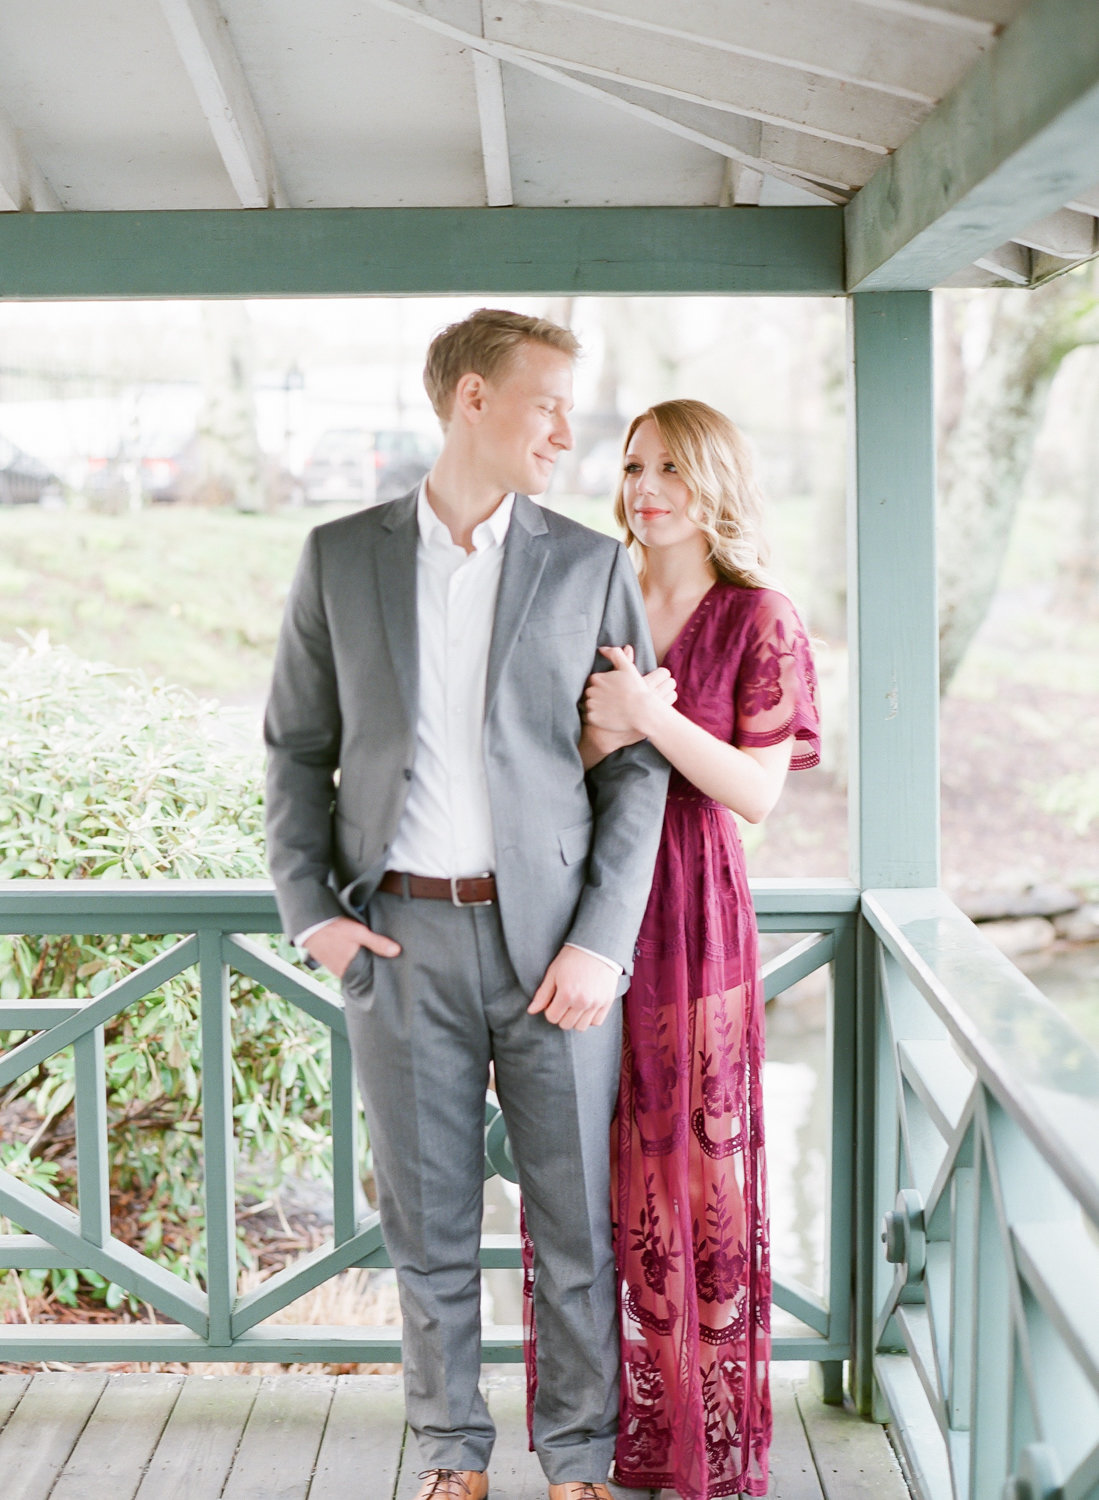 Jacqueline Anne Photography - Amanda and Brent-82